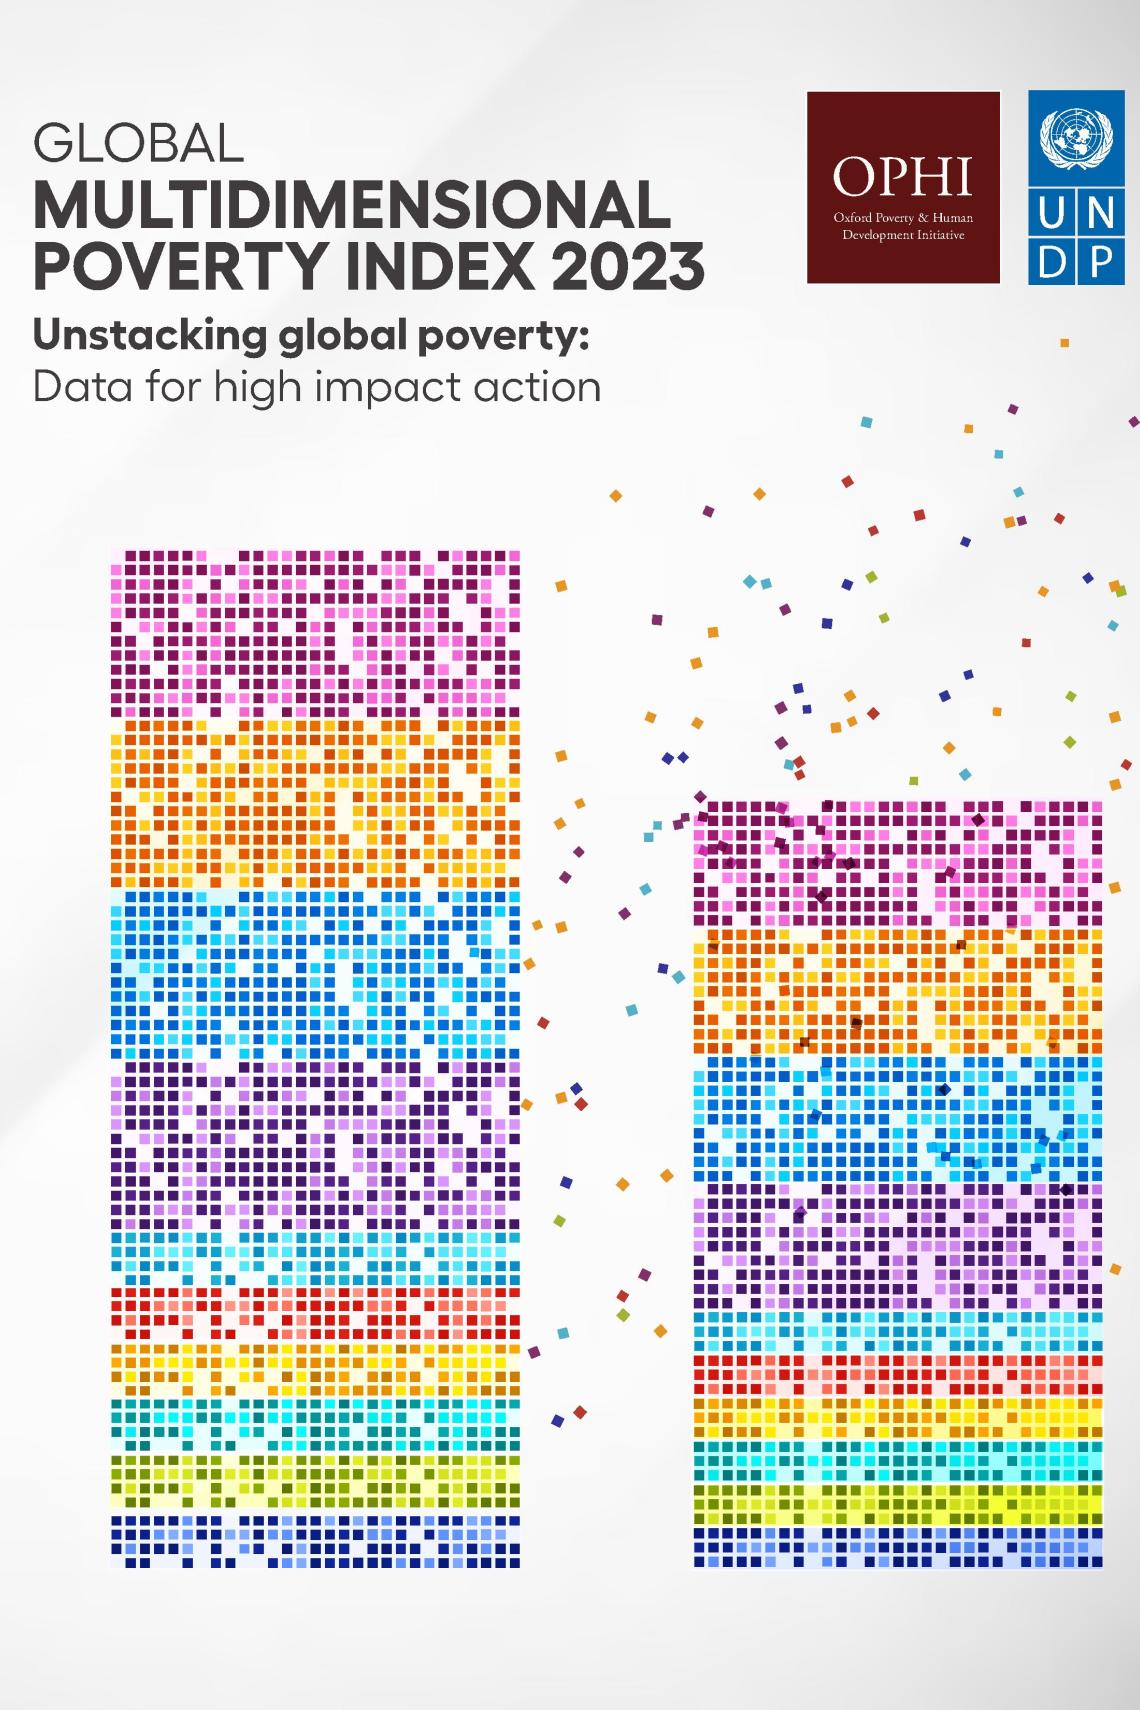 Cover of the 2023 Global Multidimensional Poverty Index report